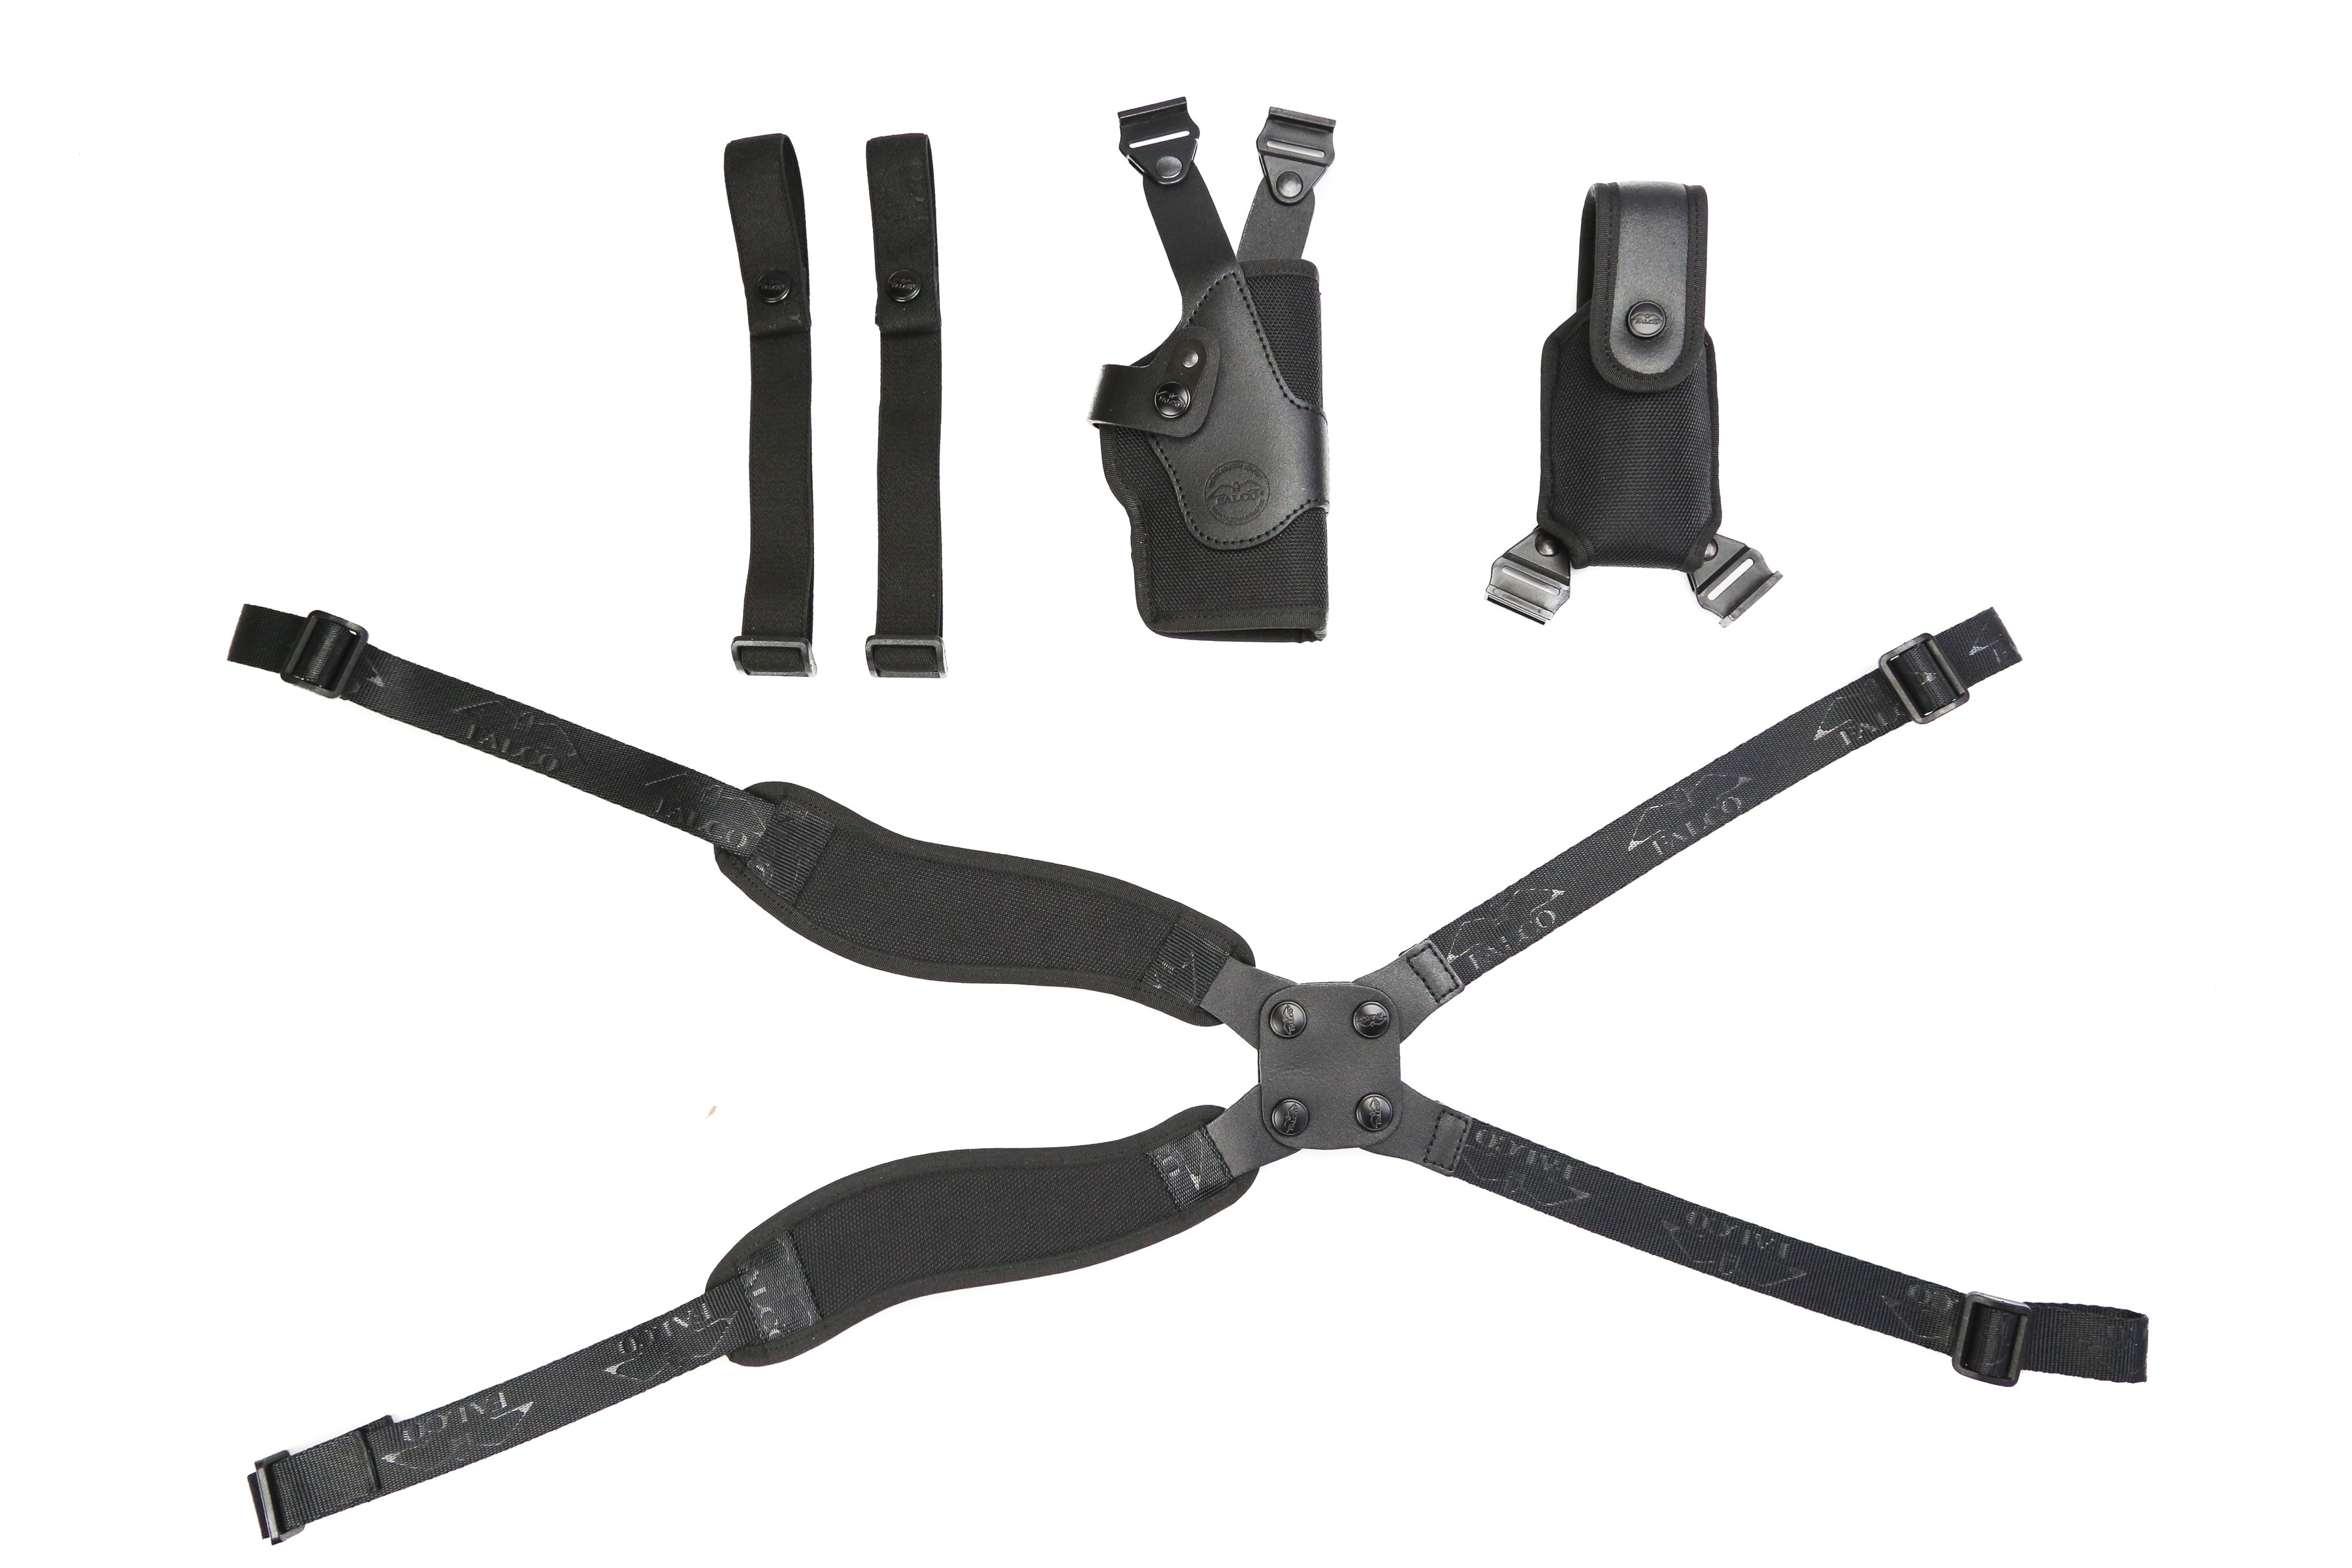 Nylon ROTO shoulder holster with accessories